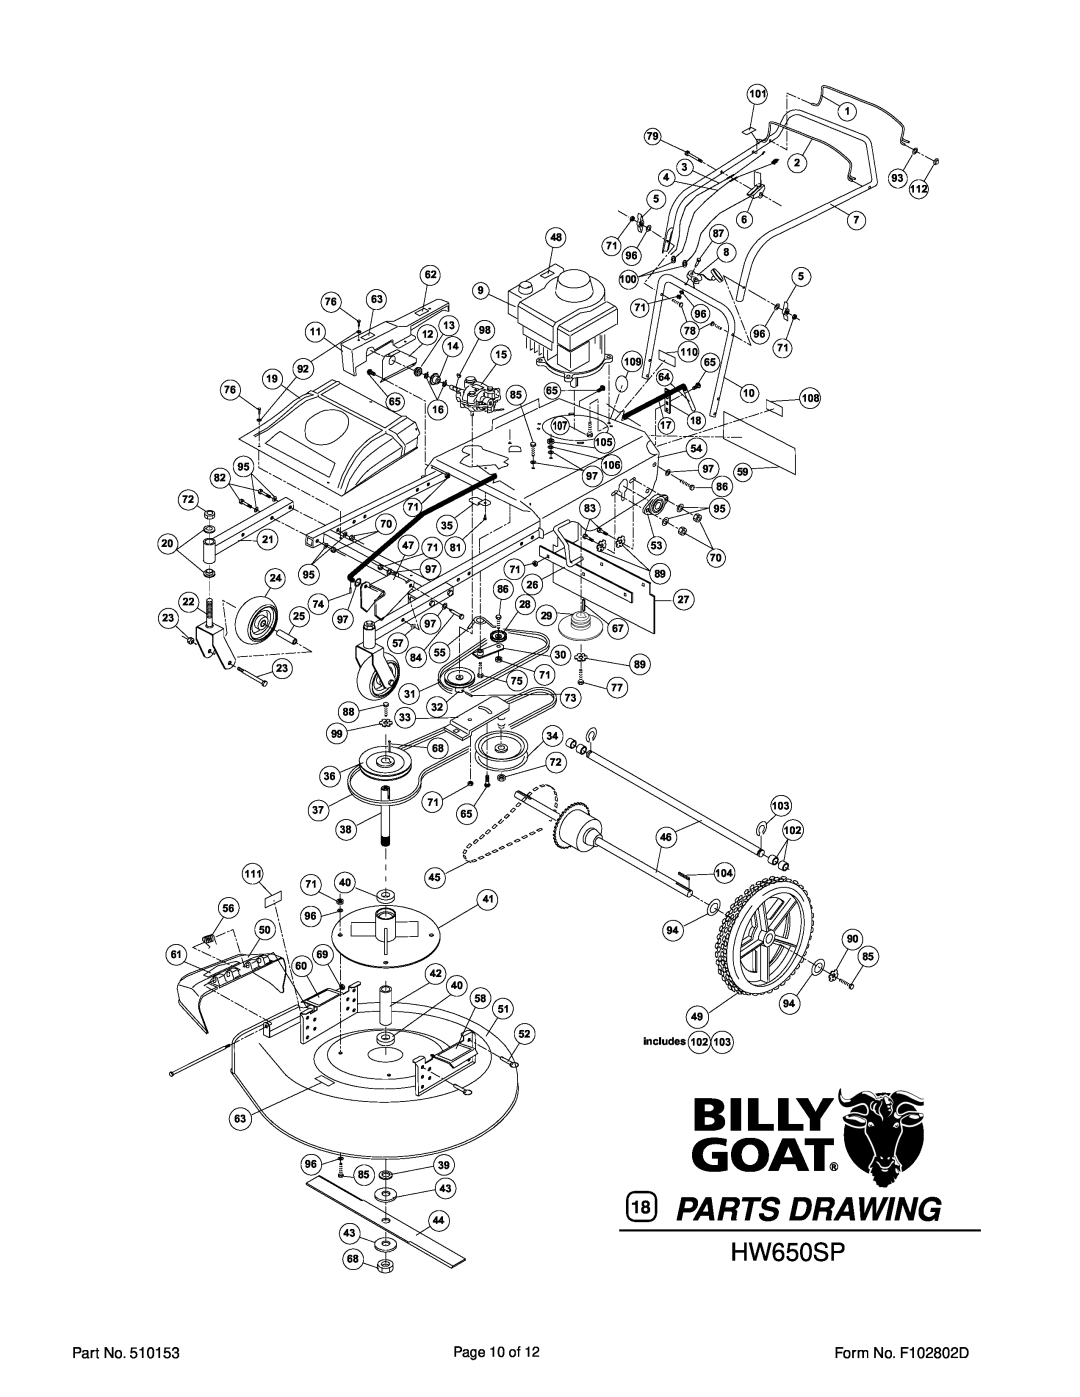 Billy Goat HW650SP owner manual Parts Drawing, 2021, 105 106, 7896 110, 108 103 102, includes 102 